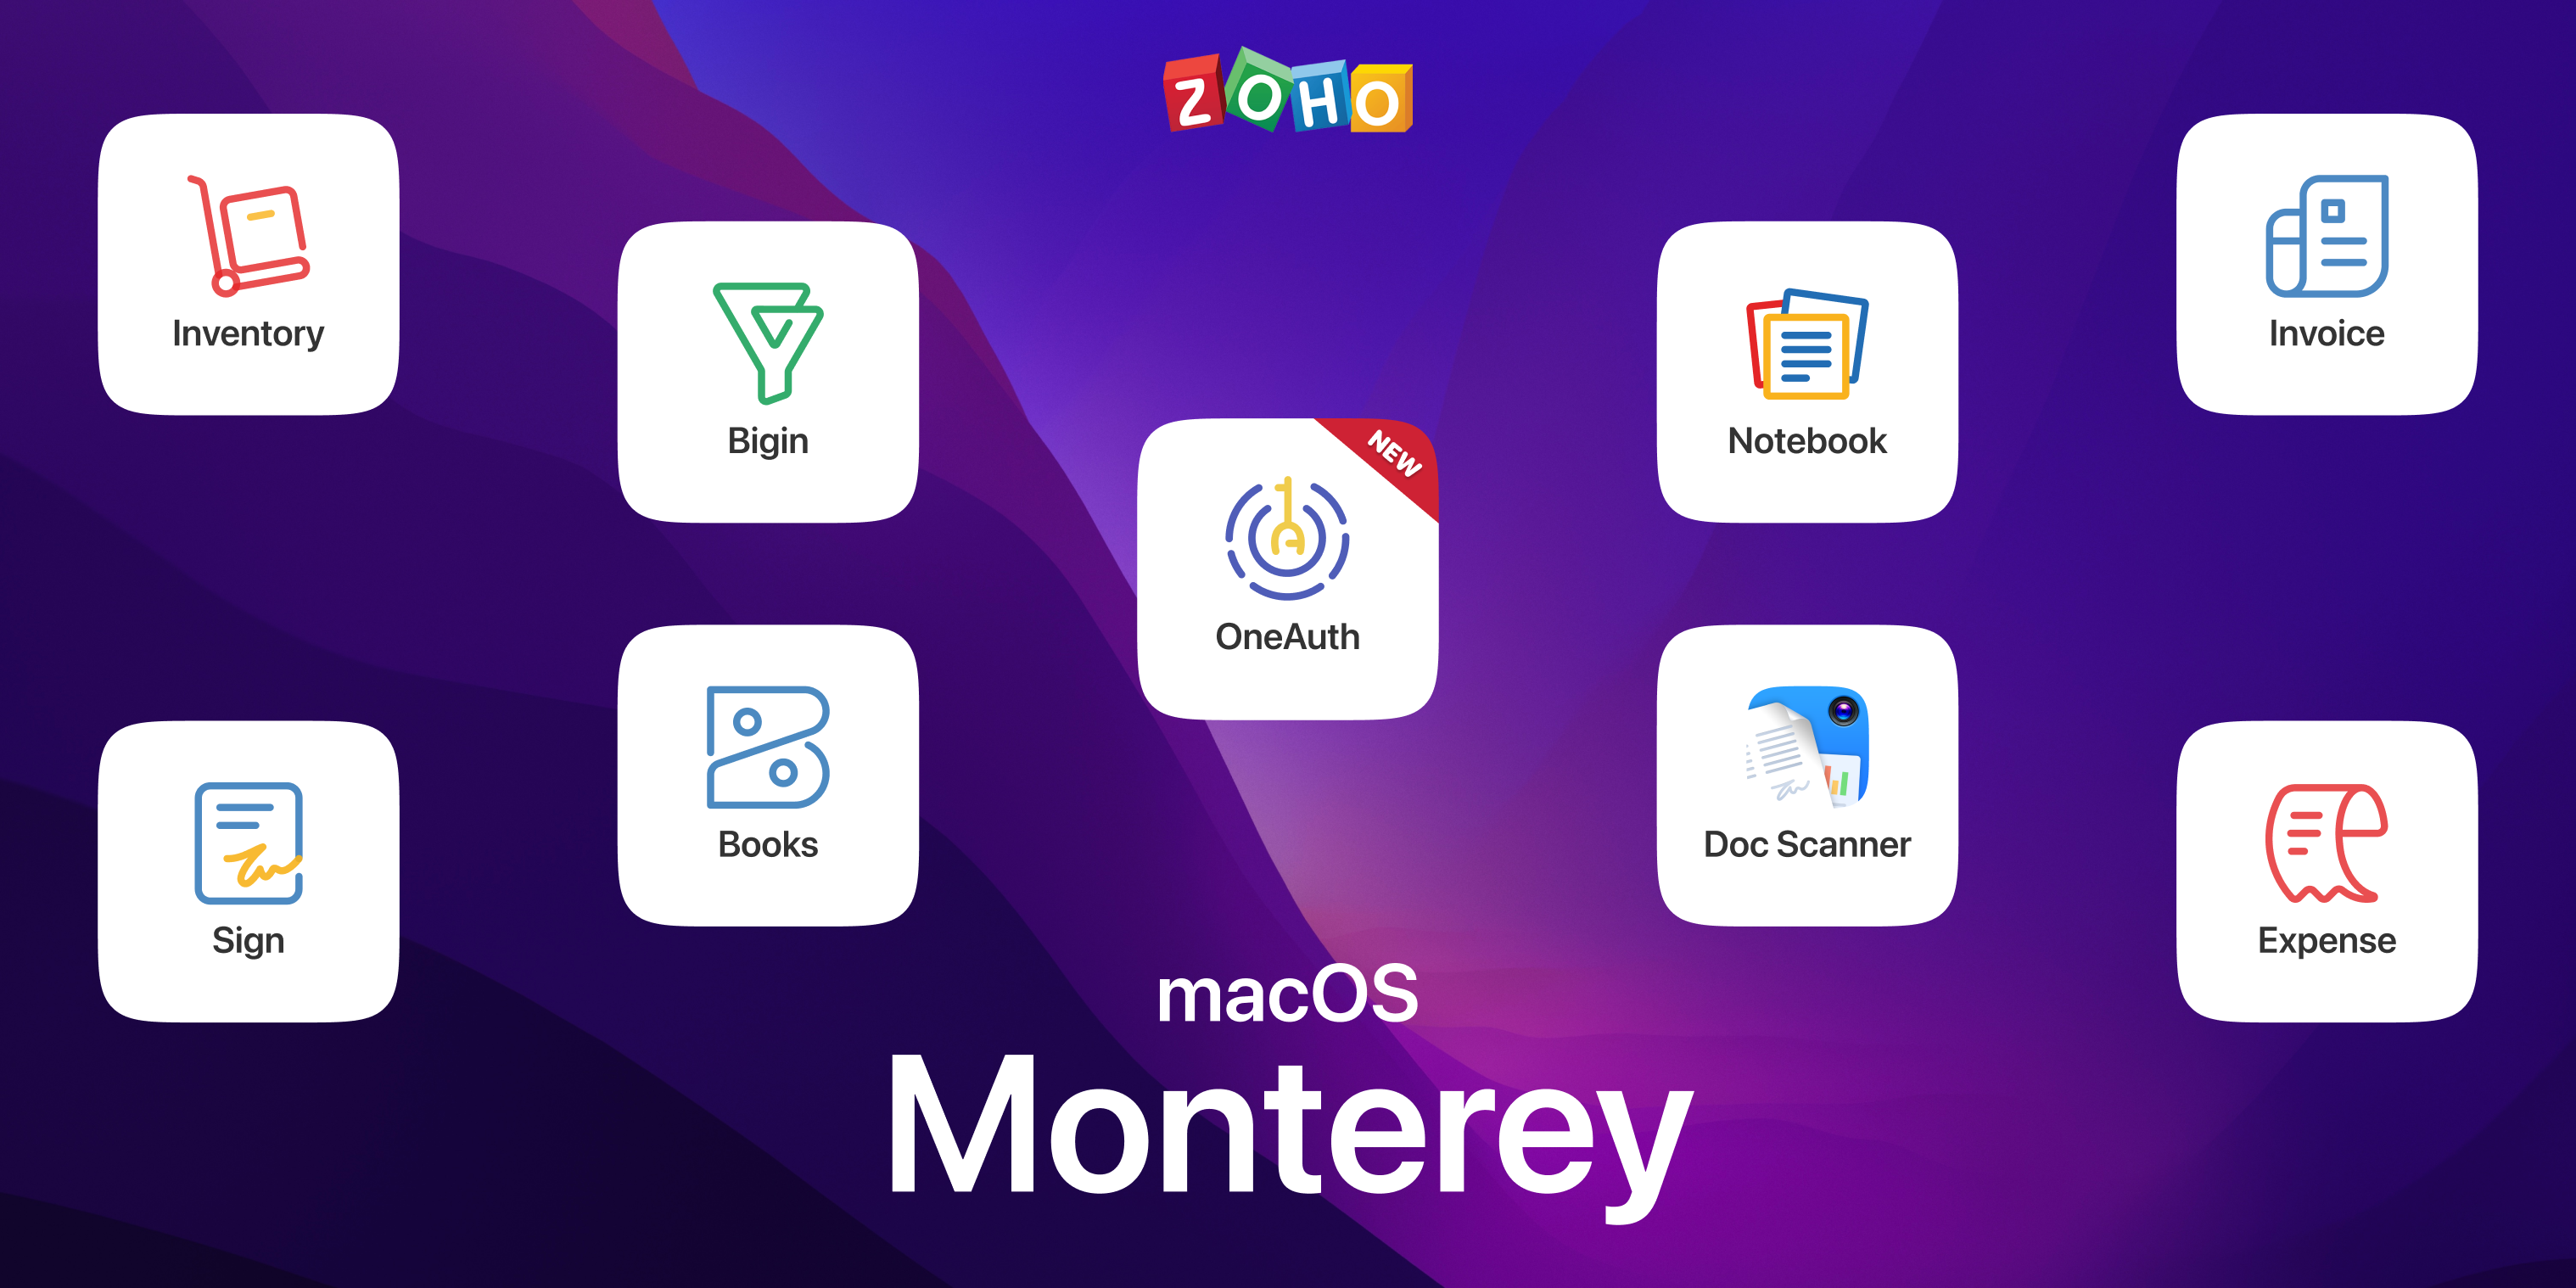 Bringing the macOS Monterey Experience to Zoho apps